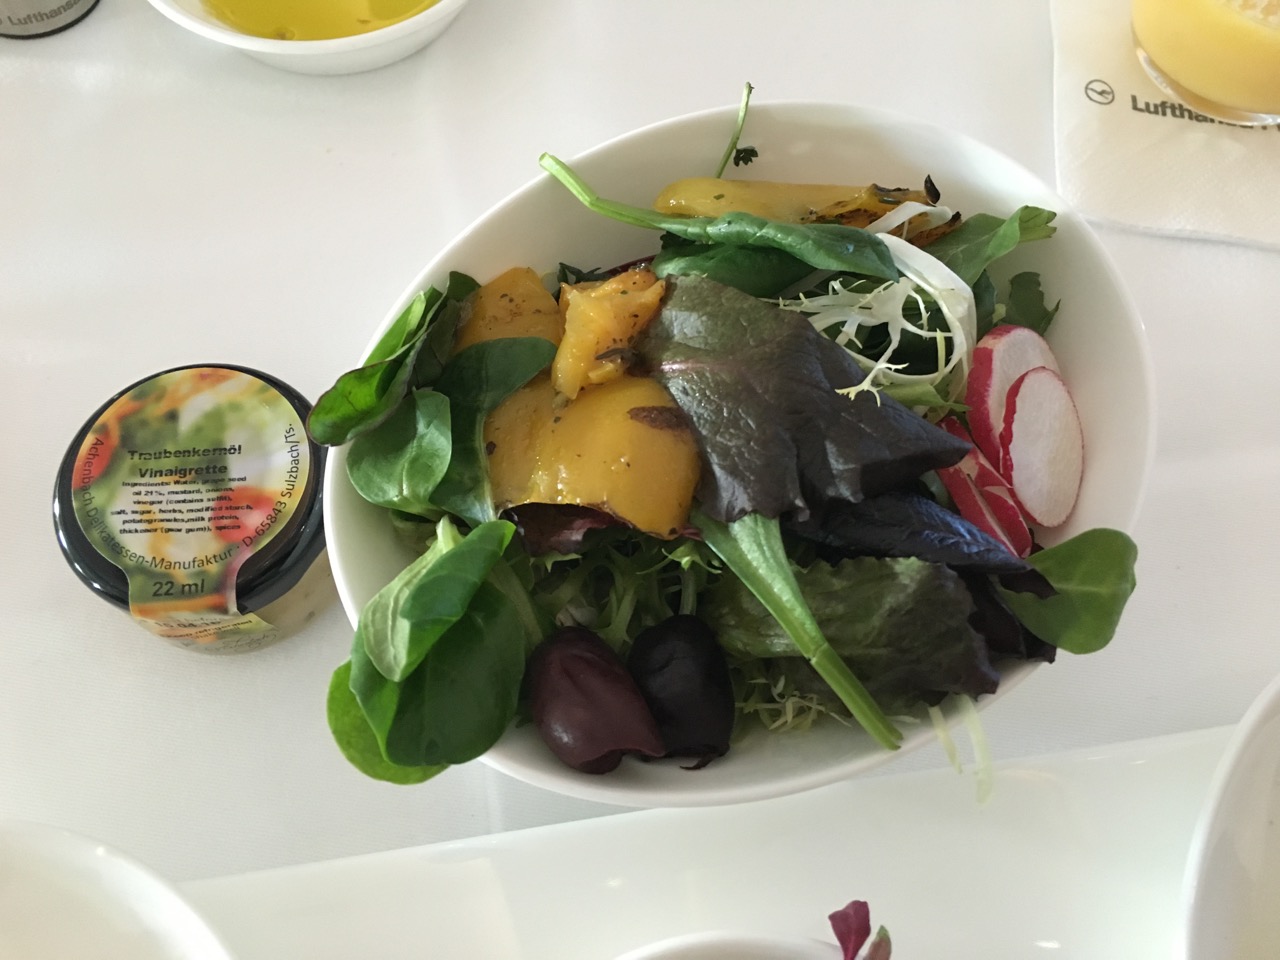 Mixed Leaf Lettuce with Red Radish, grilled Bell Pepper and Olives accompanied by Grape Seed Oil Vinaigrette